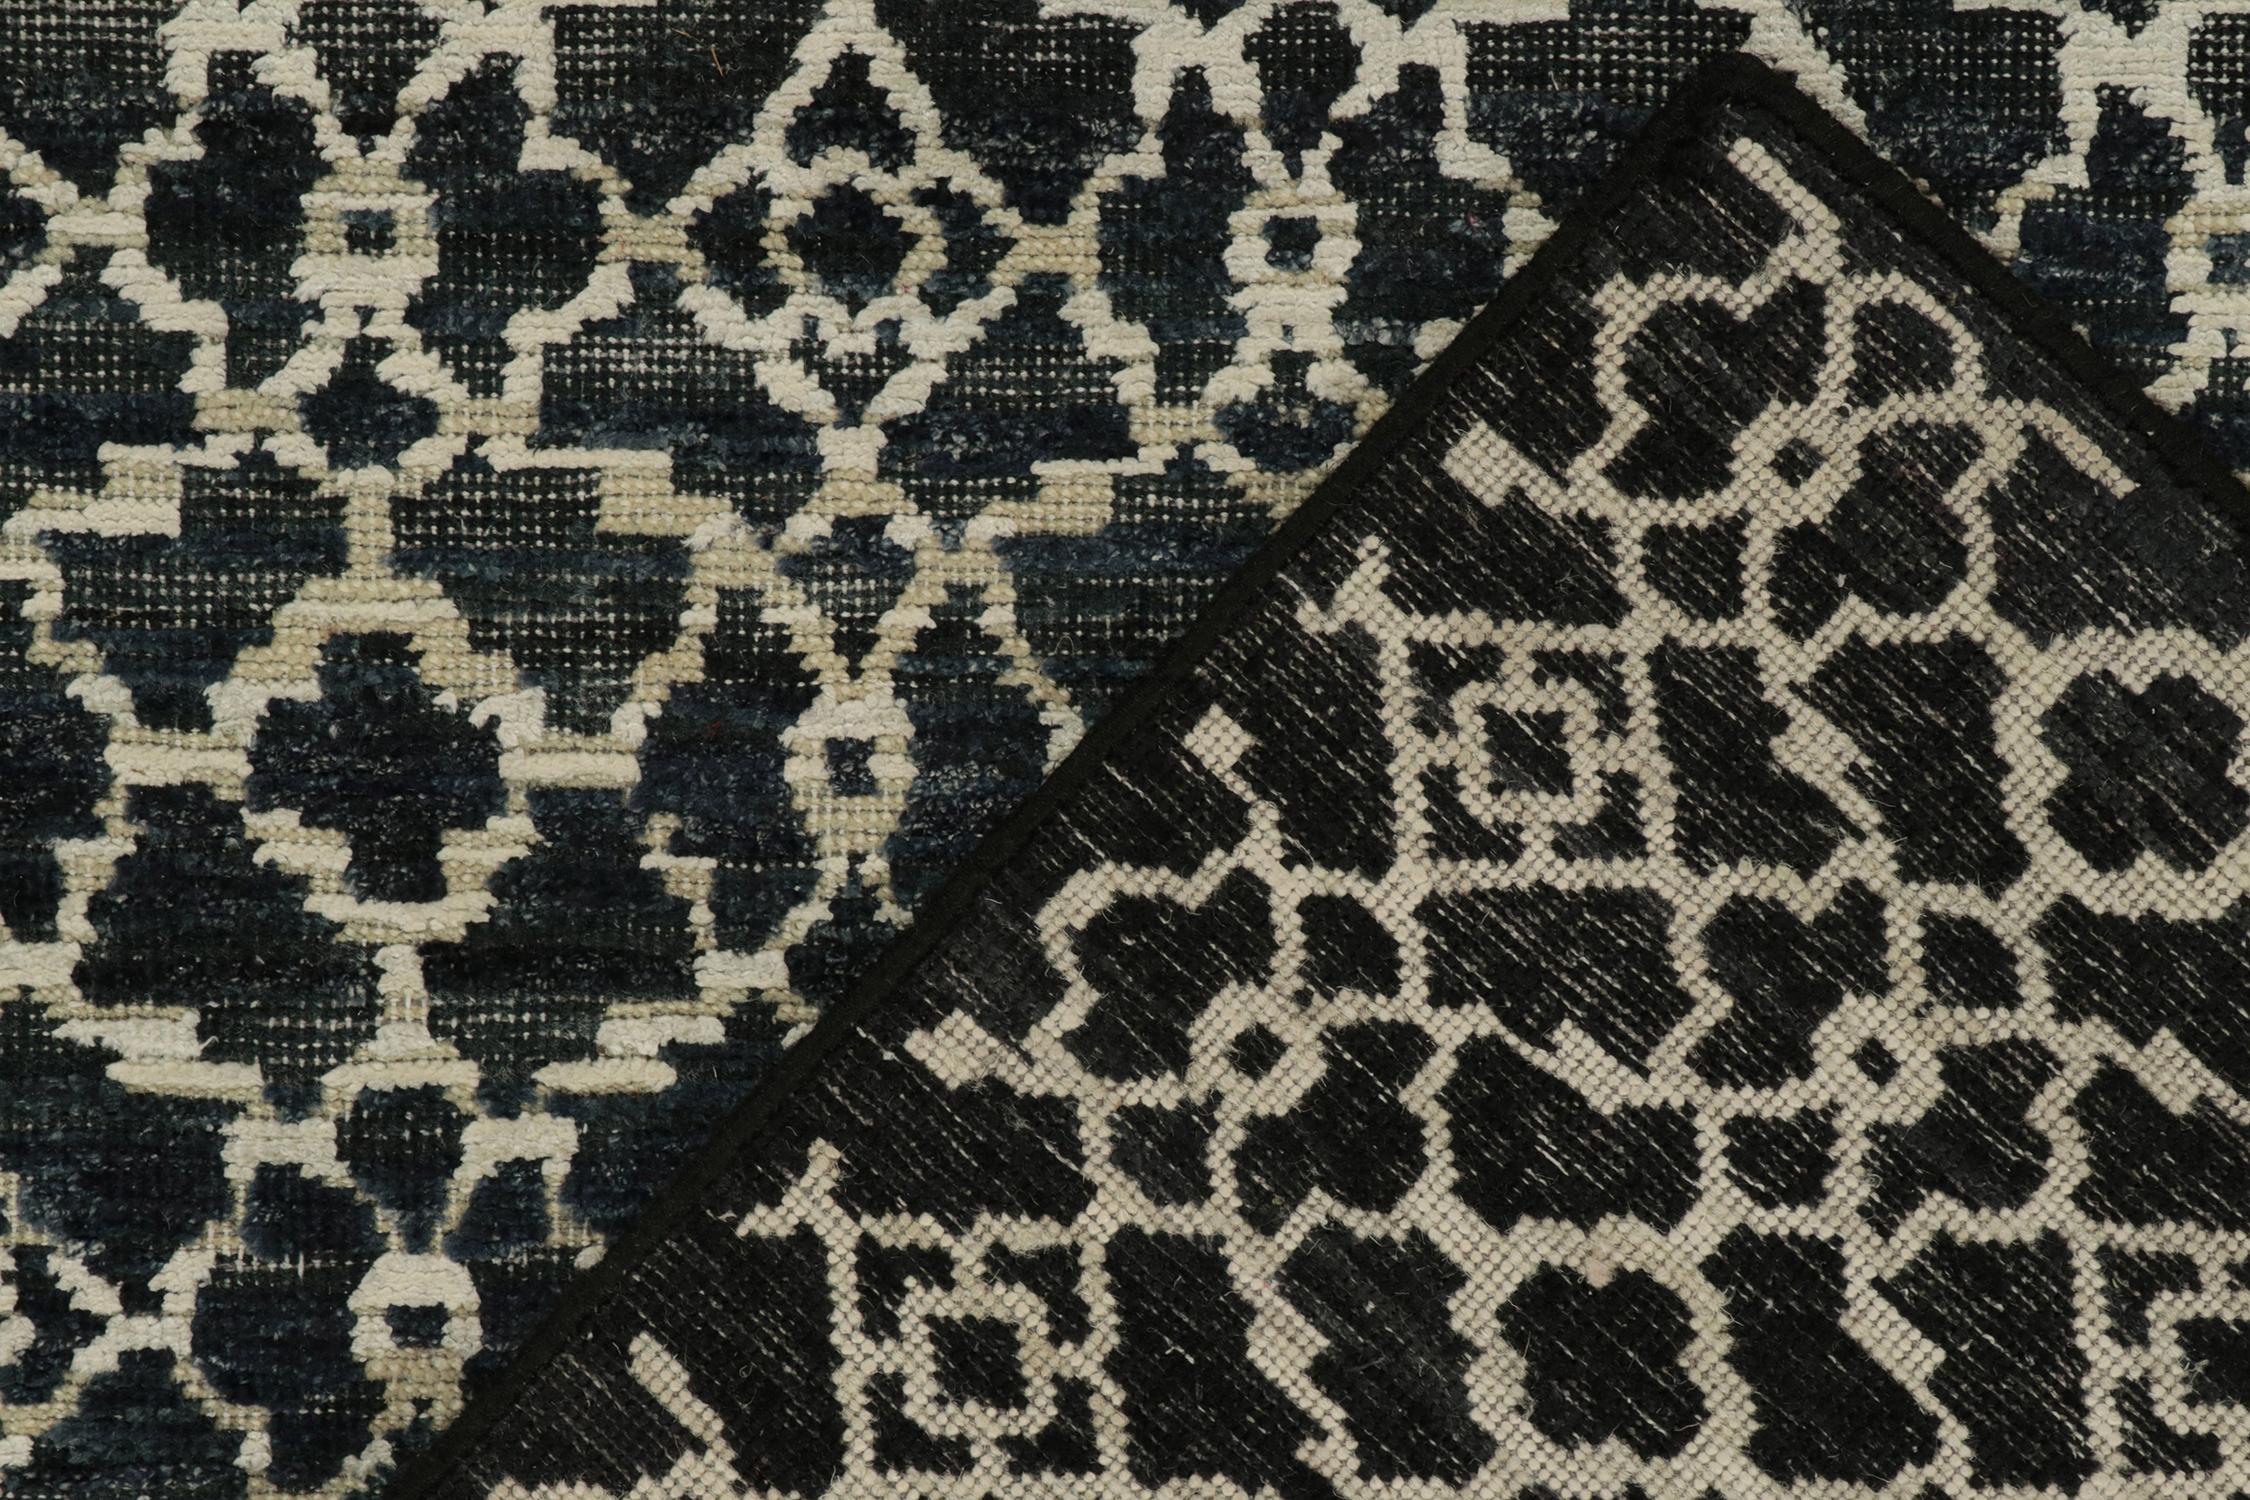 Wool Rug & Kilim’s Contemporary runner in Black, Blue & White Trellis Patterns For Sale